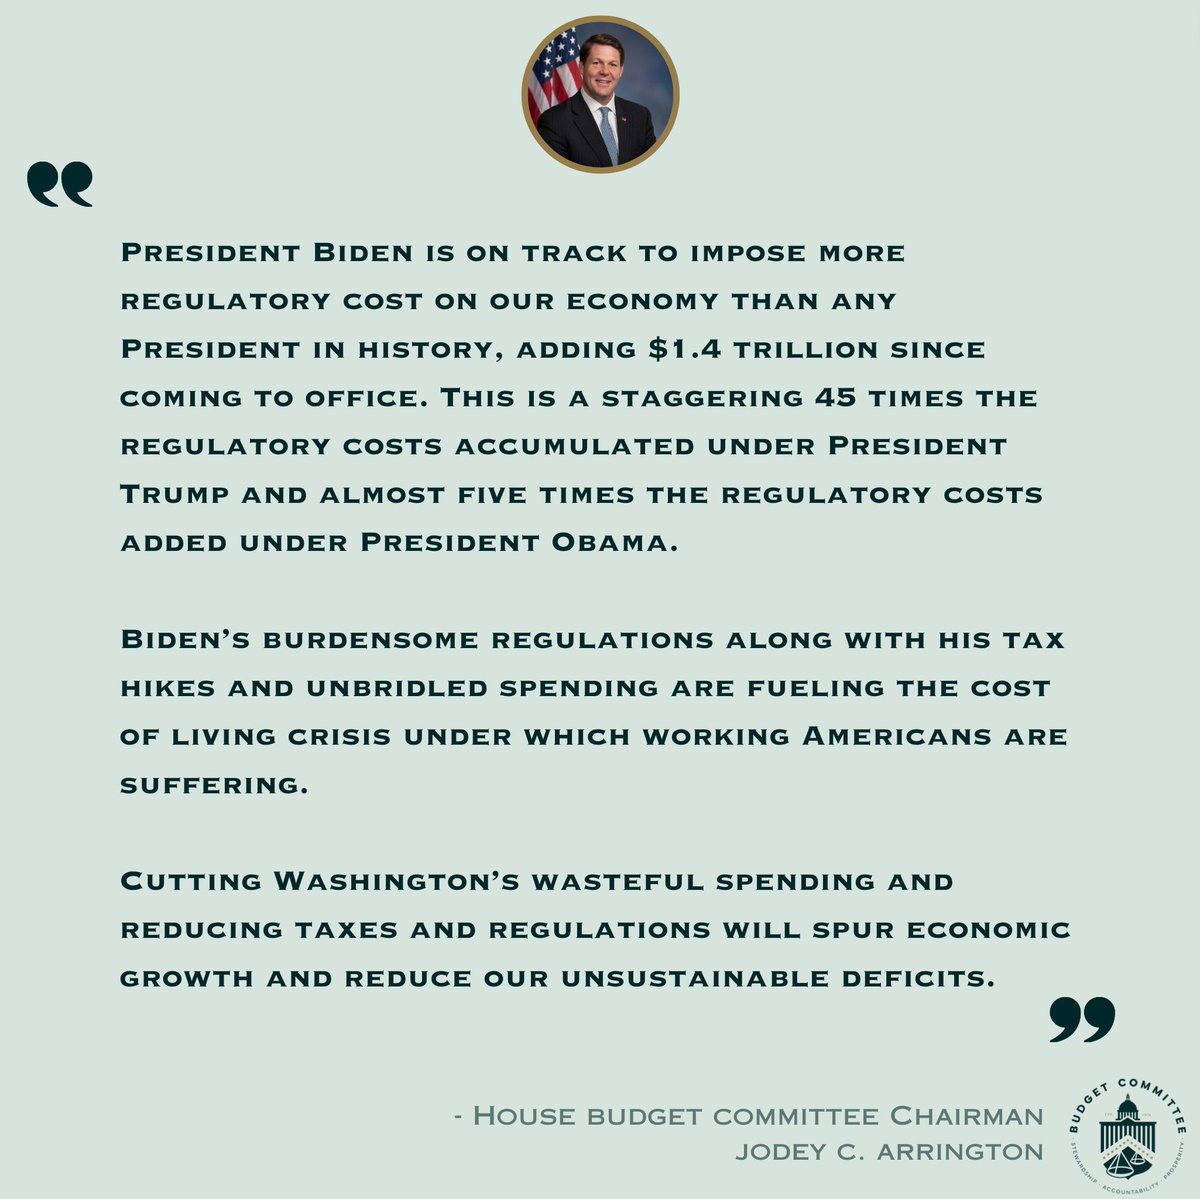 .@aaf found that President Biden’s regulations since taking office have cost nearly $1.4 trillion. Read Chairman @reparrington’s reaction to their findings.